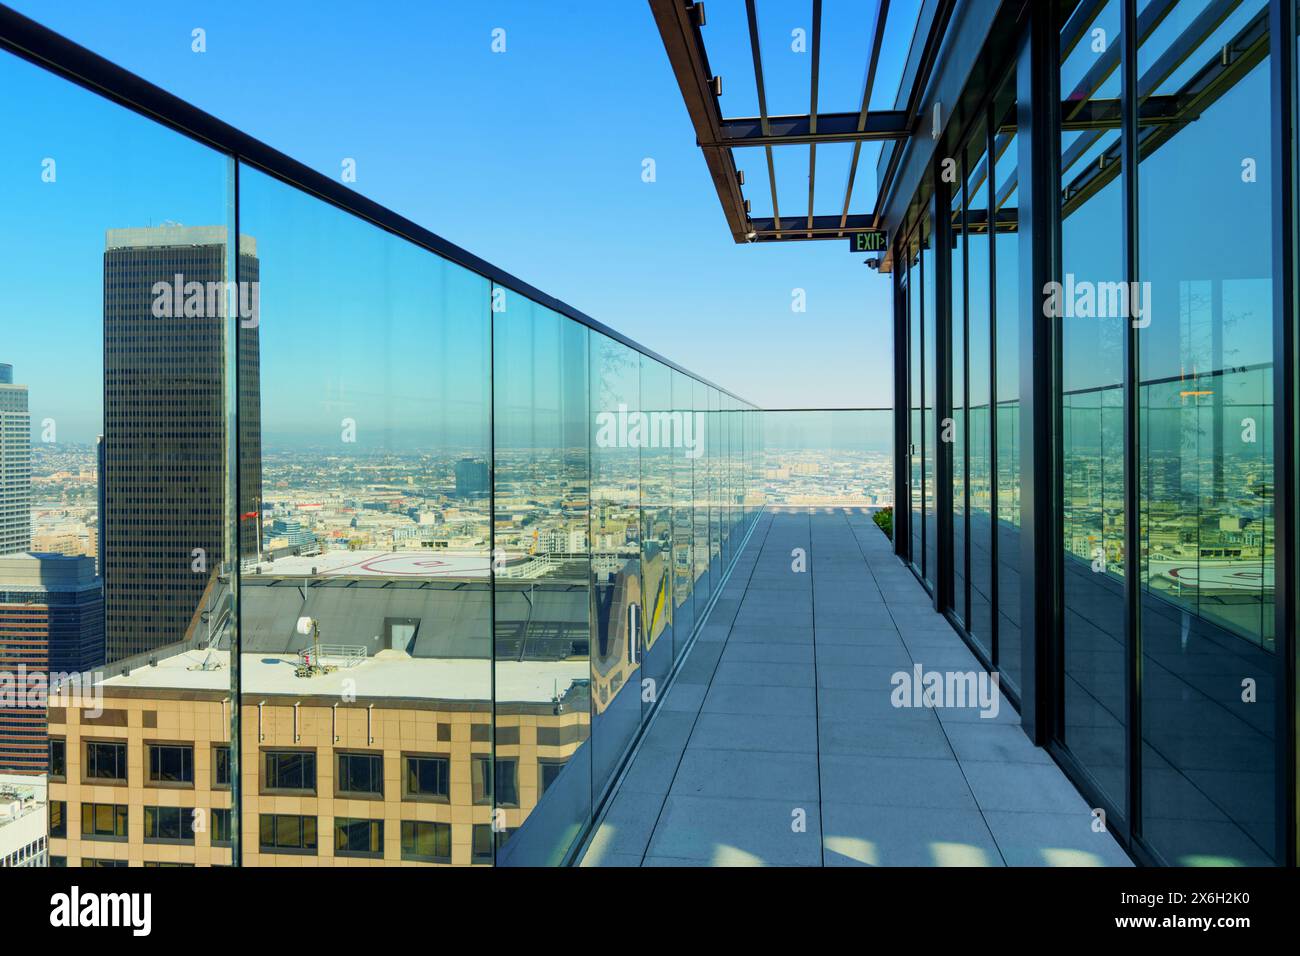 Spacious balcony in Los Angeles residential complex boasting a sleek glass facade and stunning views of downtown Los Angeles. Stock Photo